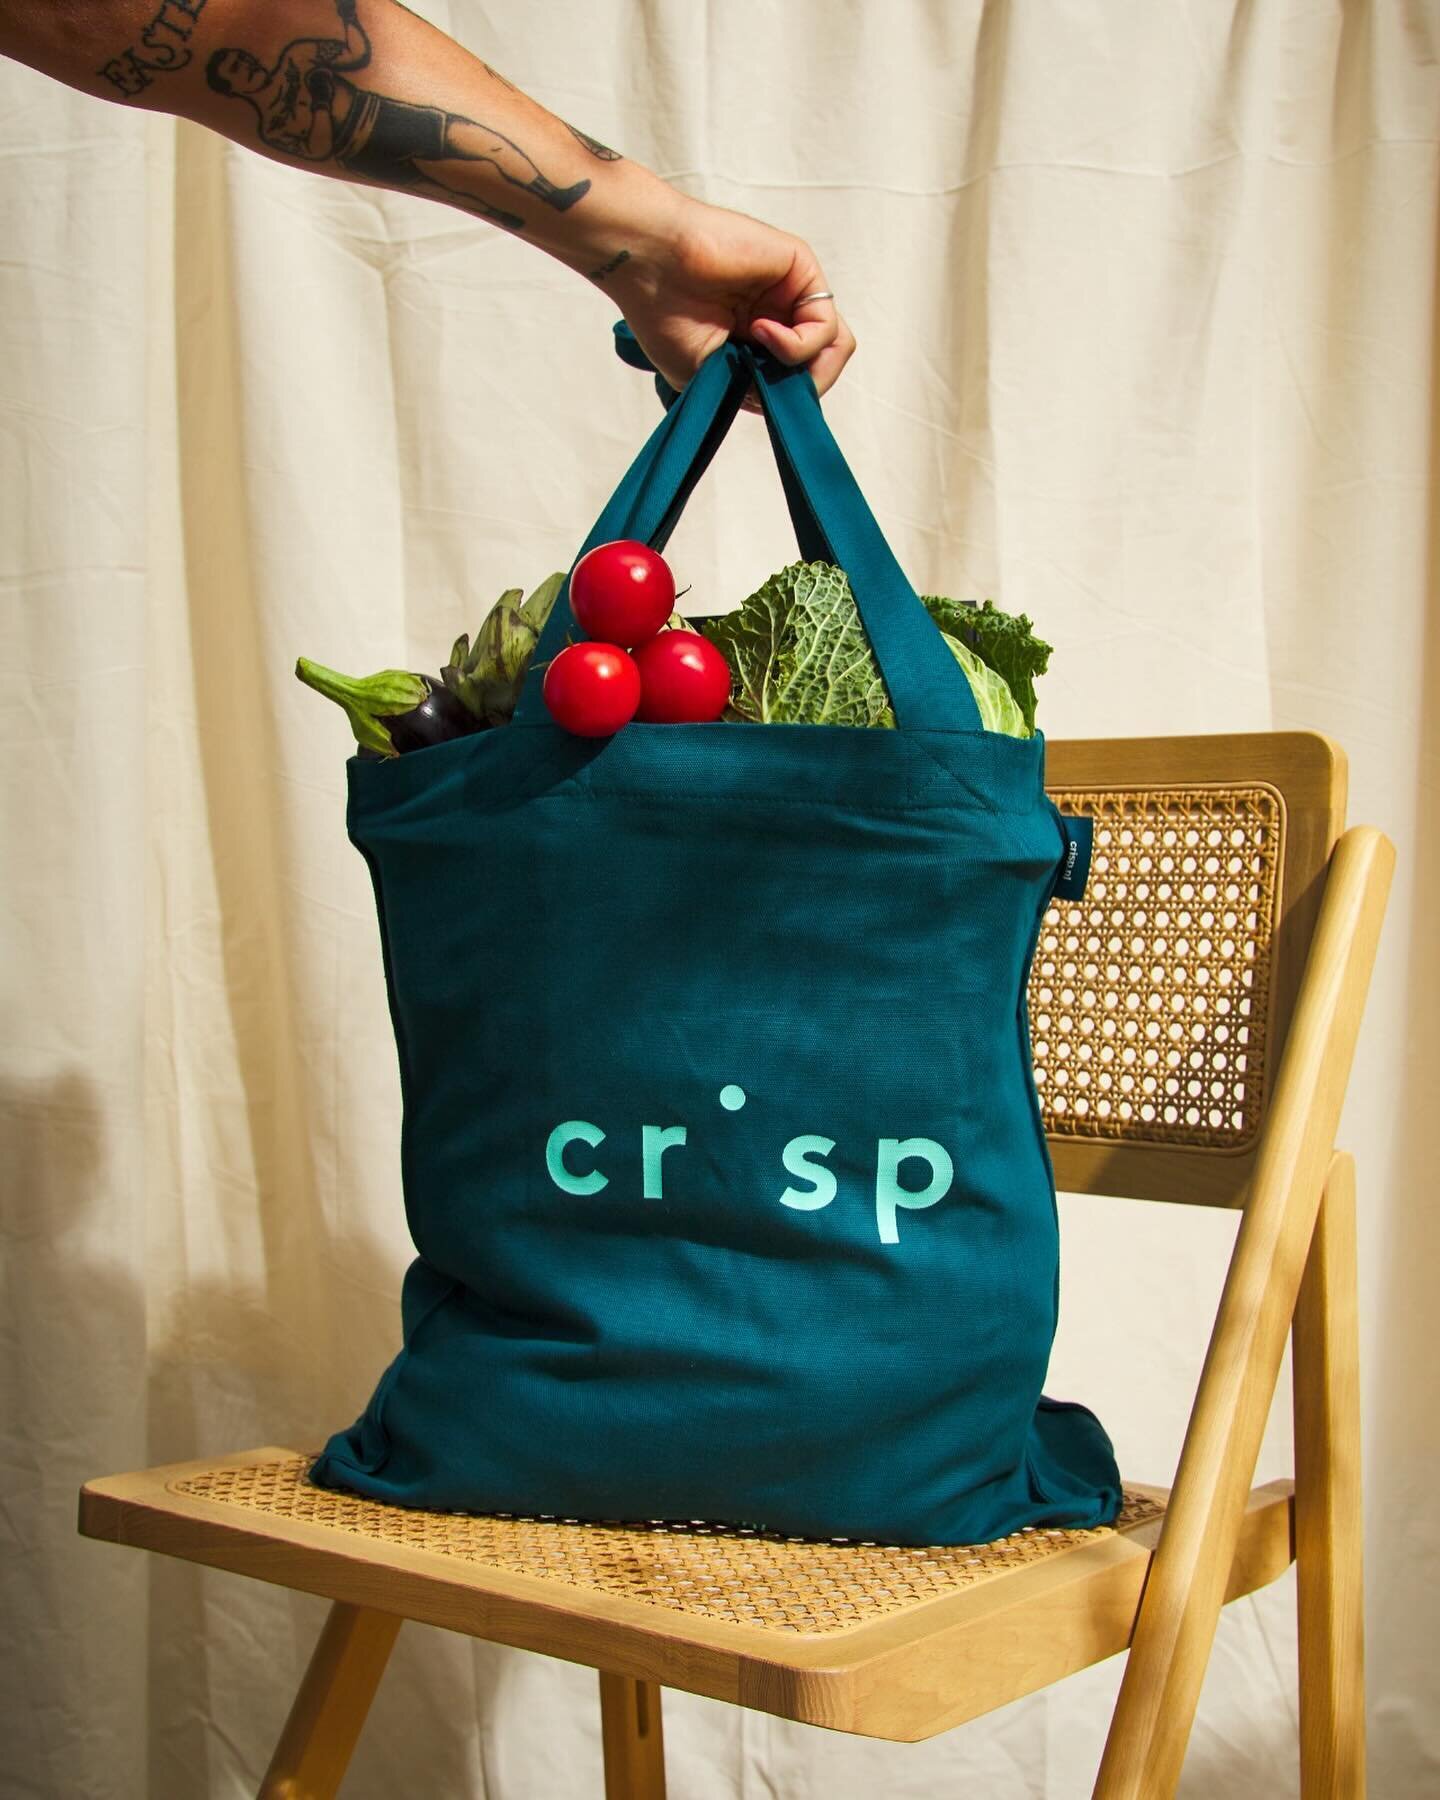 The famous Crisp shopper made by Unrobe. Do you have one at home? We&rsquo;d love to make it for your company as well. Ask for a quotation via the link in bio and we&rsquo;ve got you covered.

#unrobe #brandloyalty #brandawareness #shopper #crisp #su